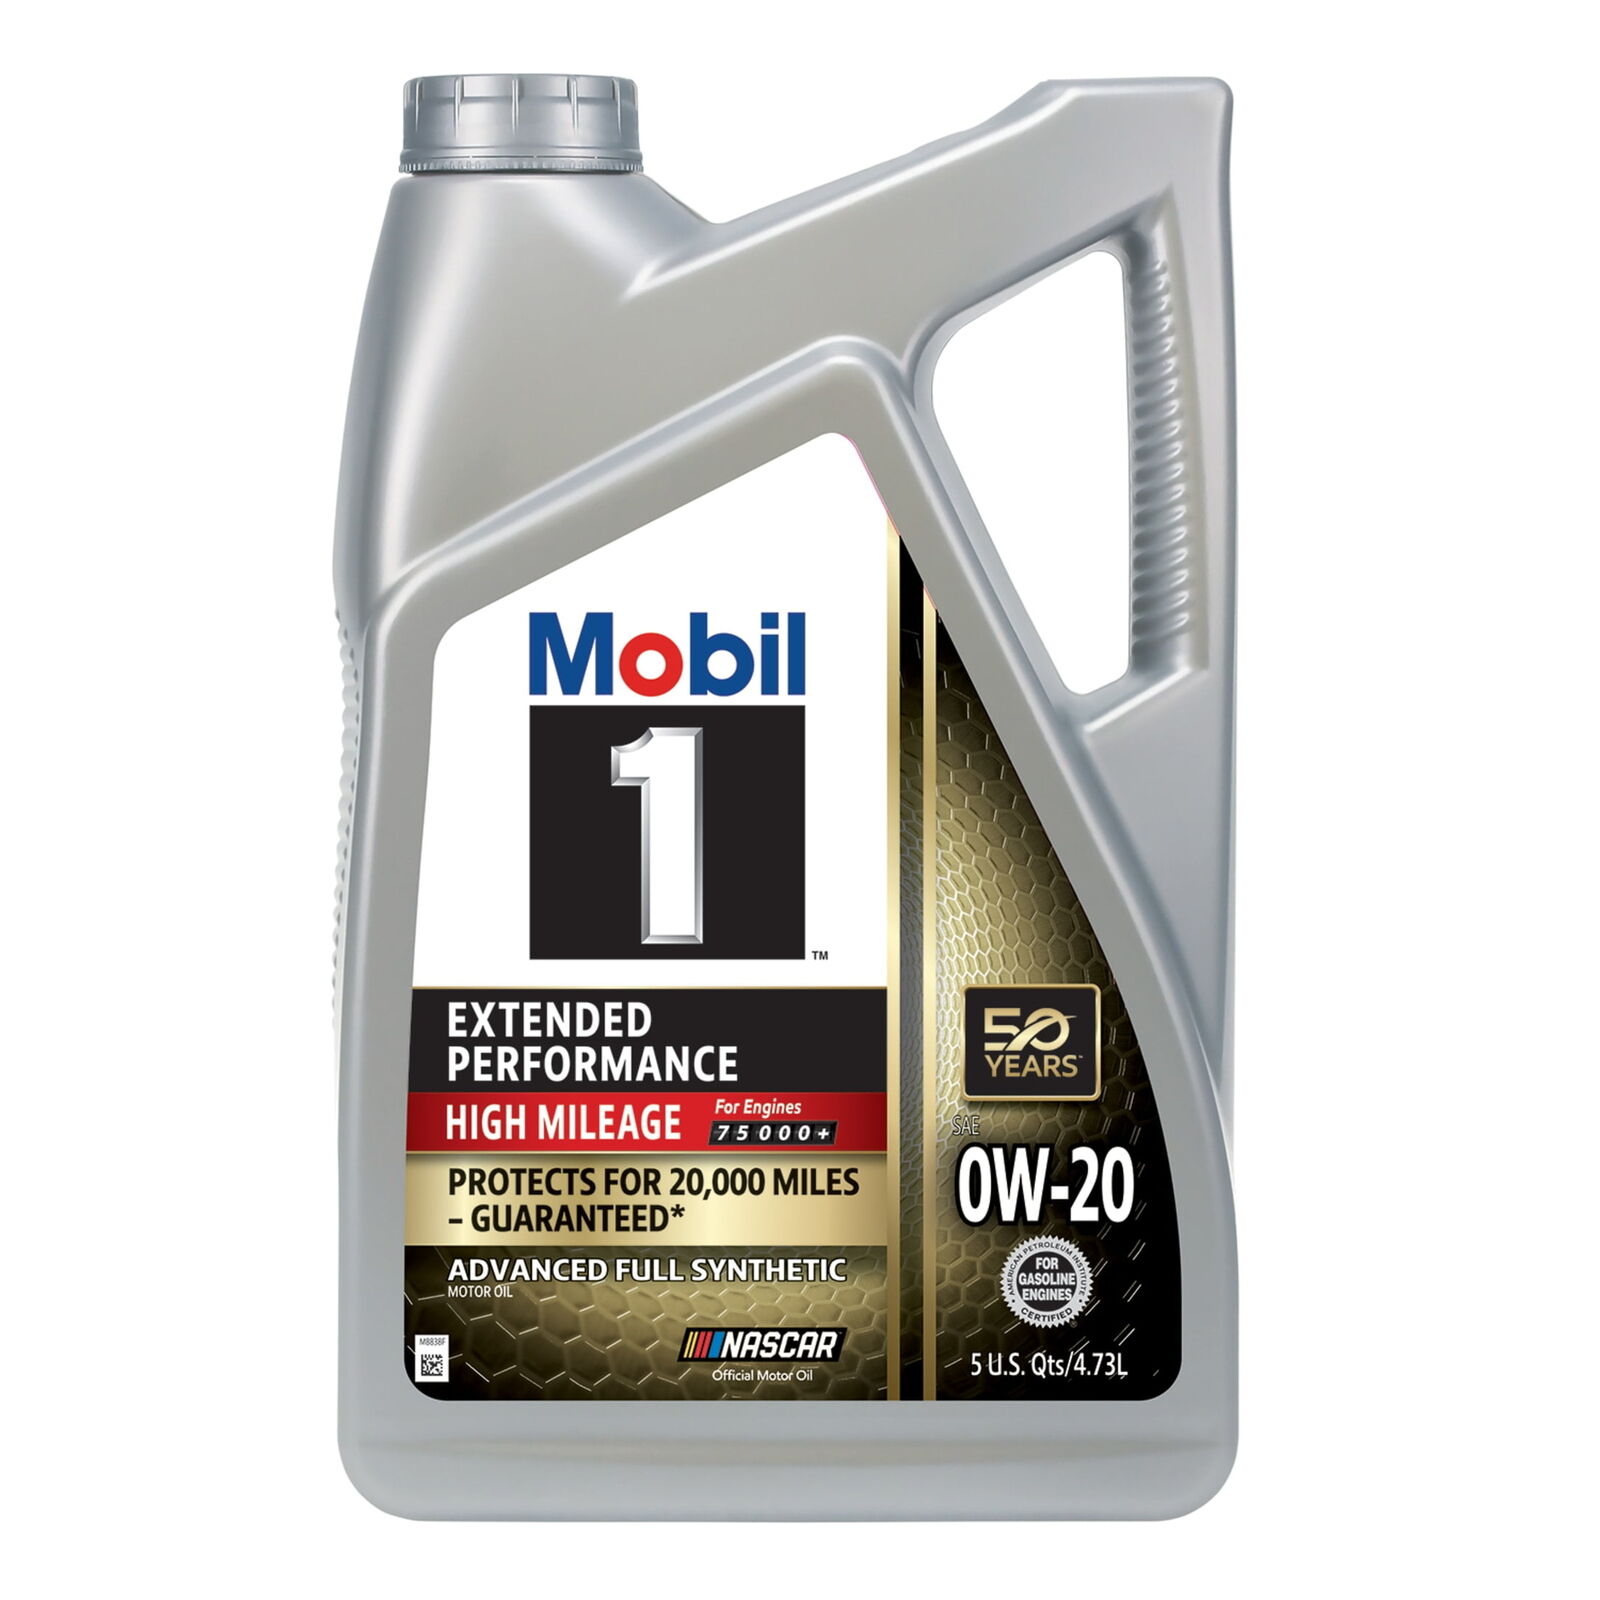 1 Extended Performance High Mileage Full Synthetic Motor Oil 0W-20, 5 Quart